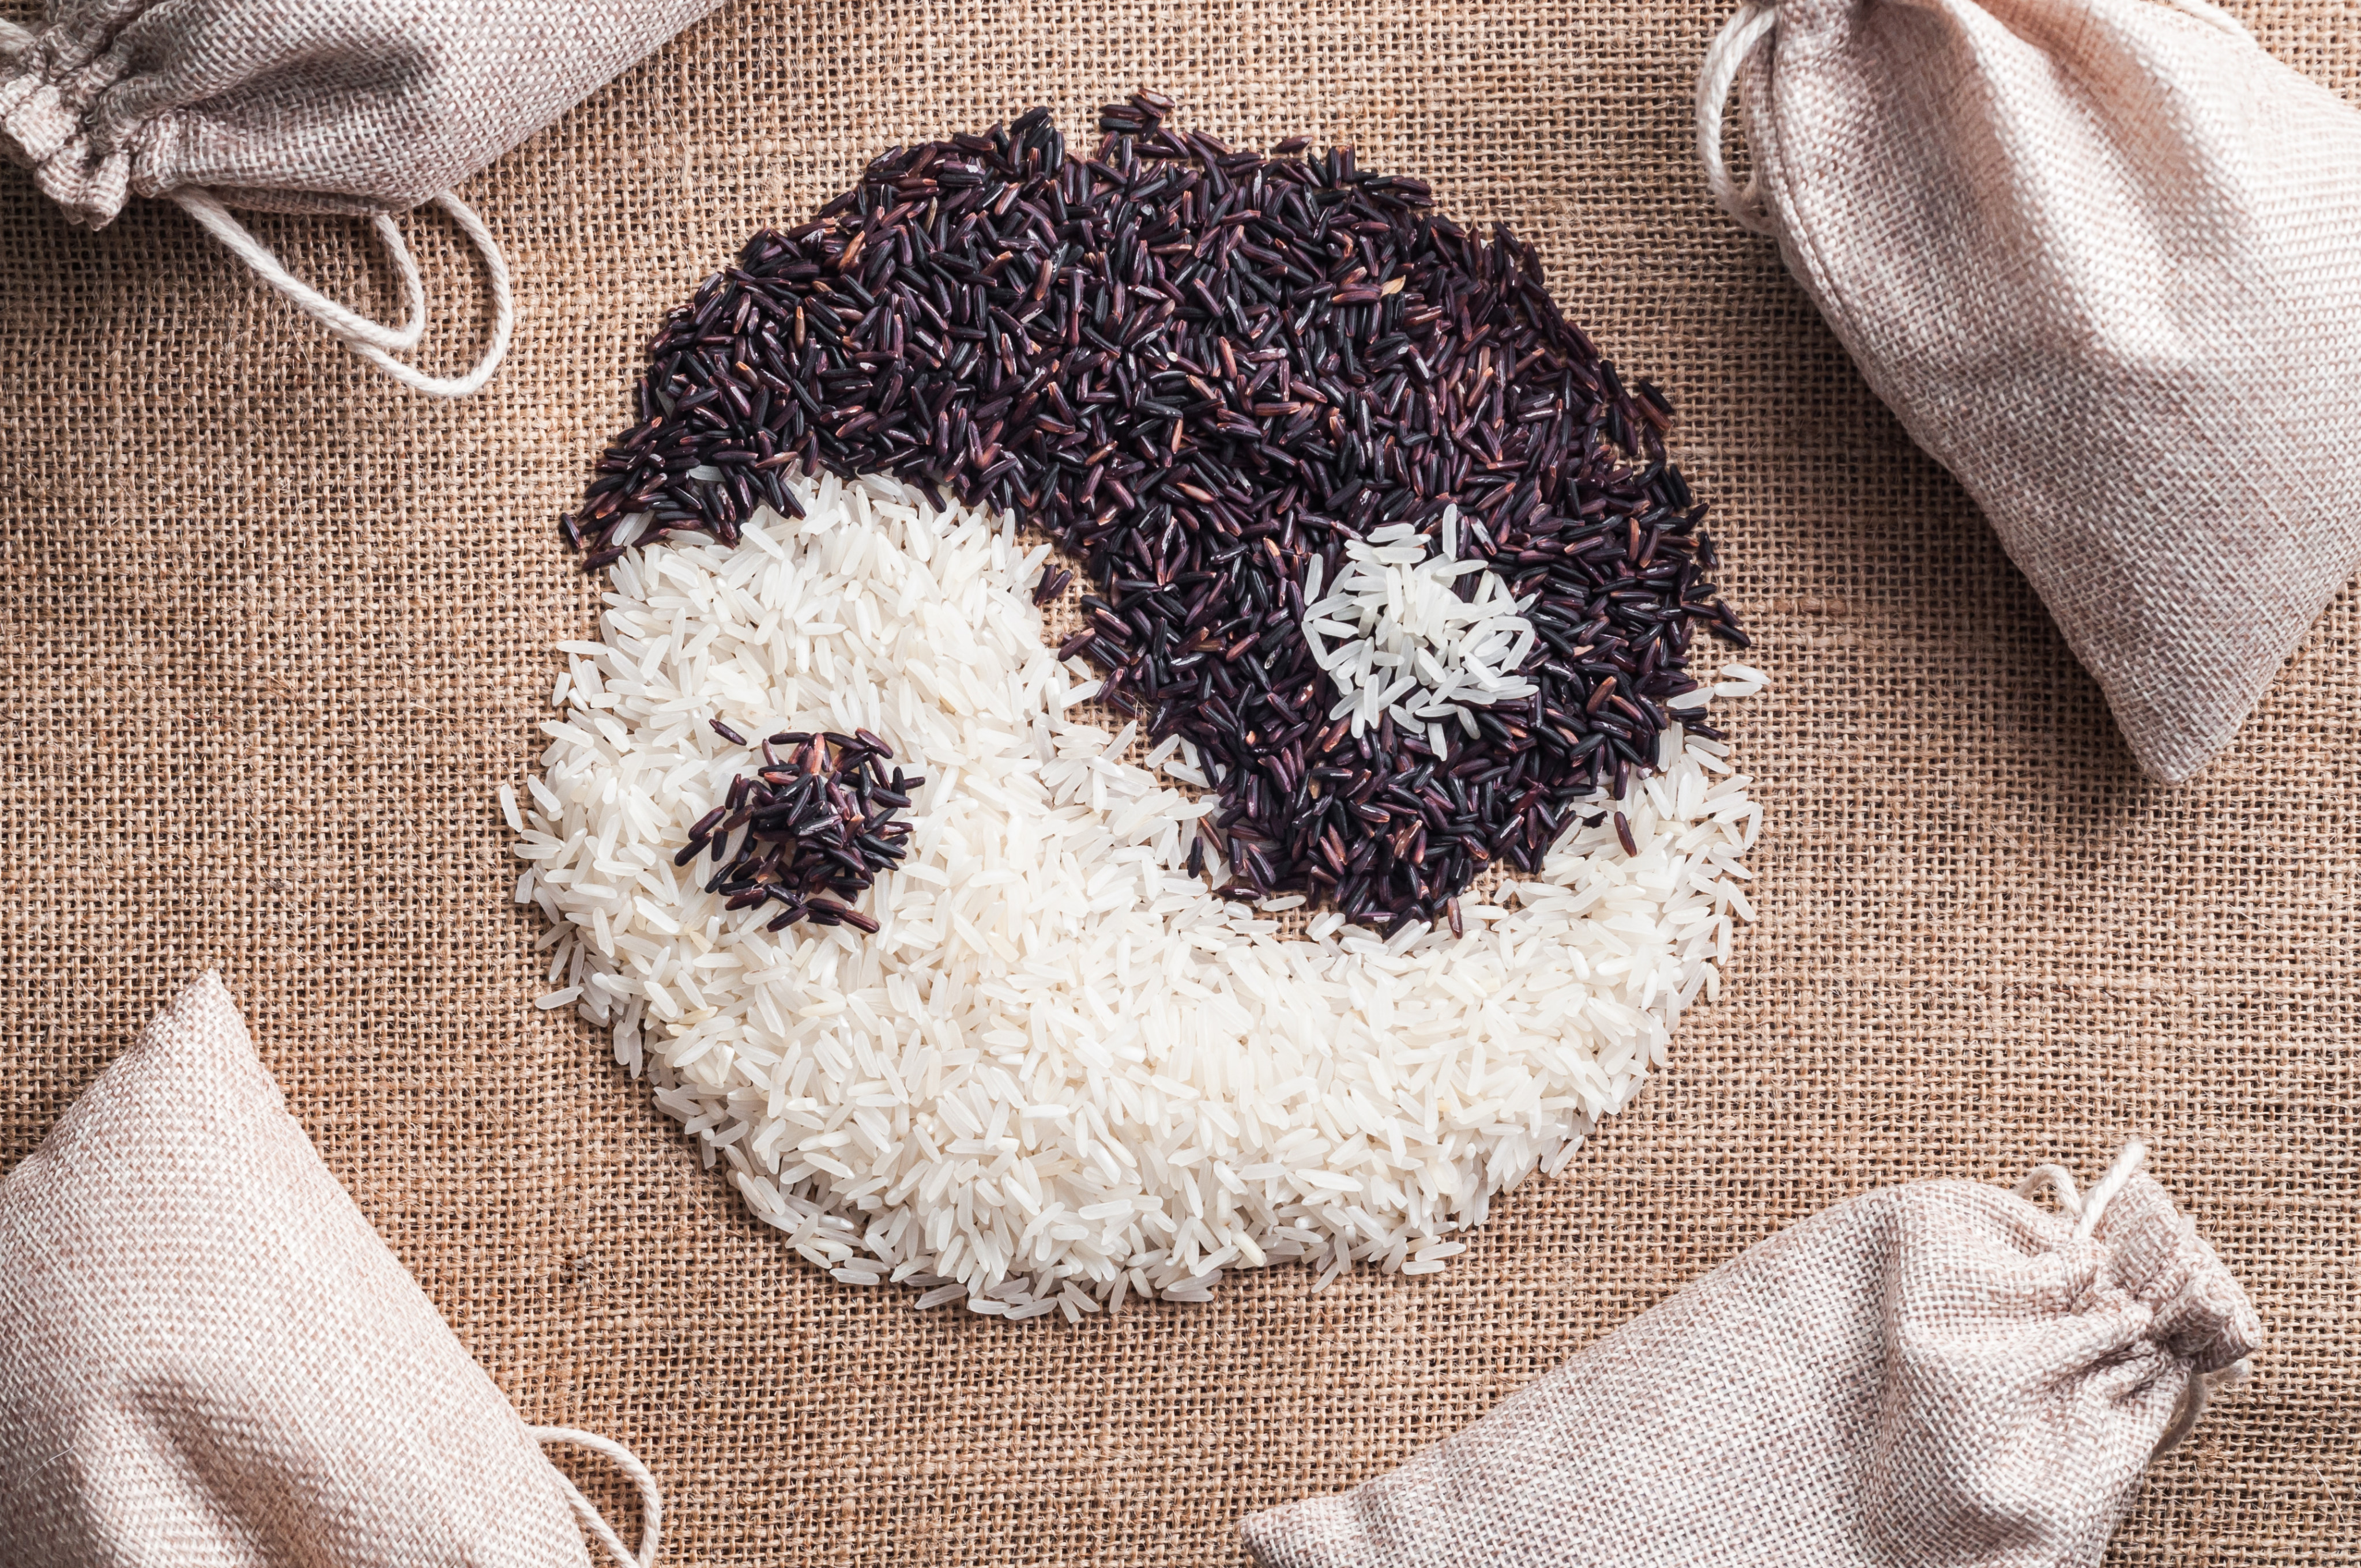 Chinese medicine emphasises having a balance between the yin and yang energies. Photo: Shutterstock